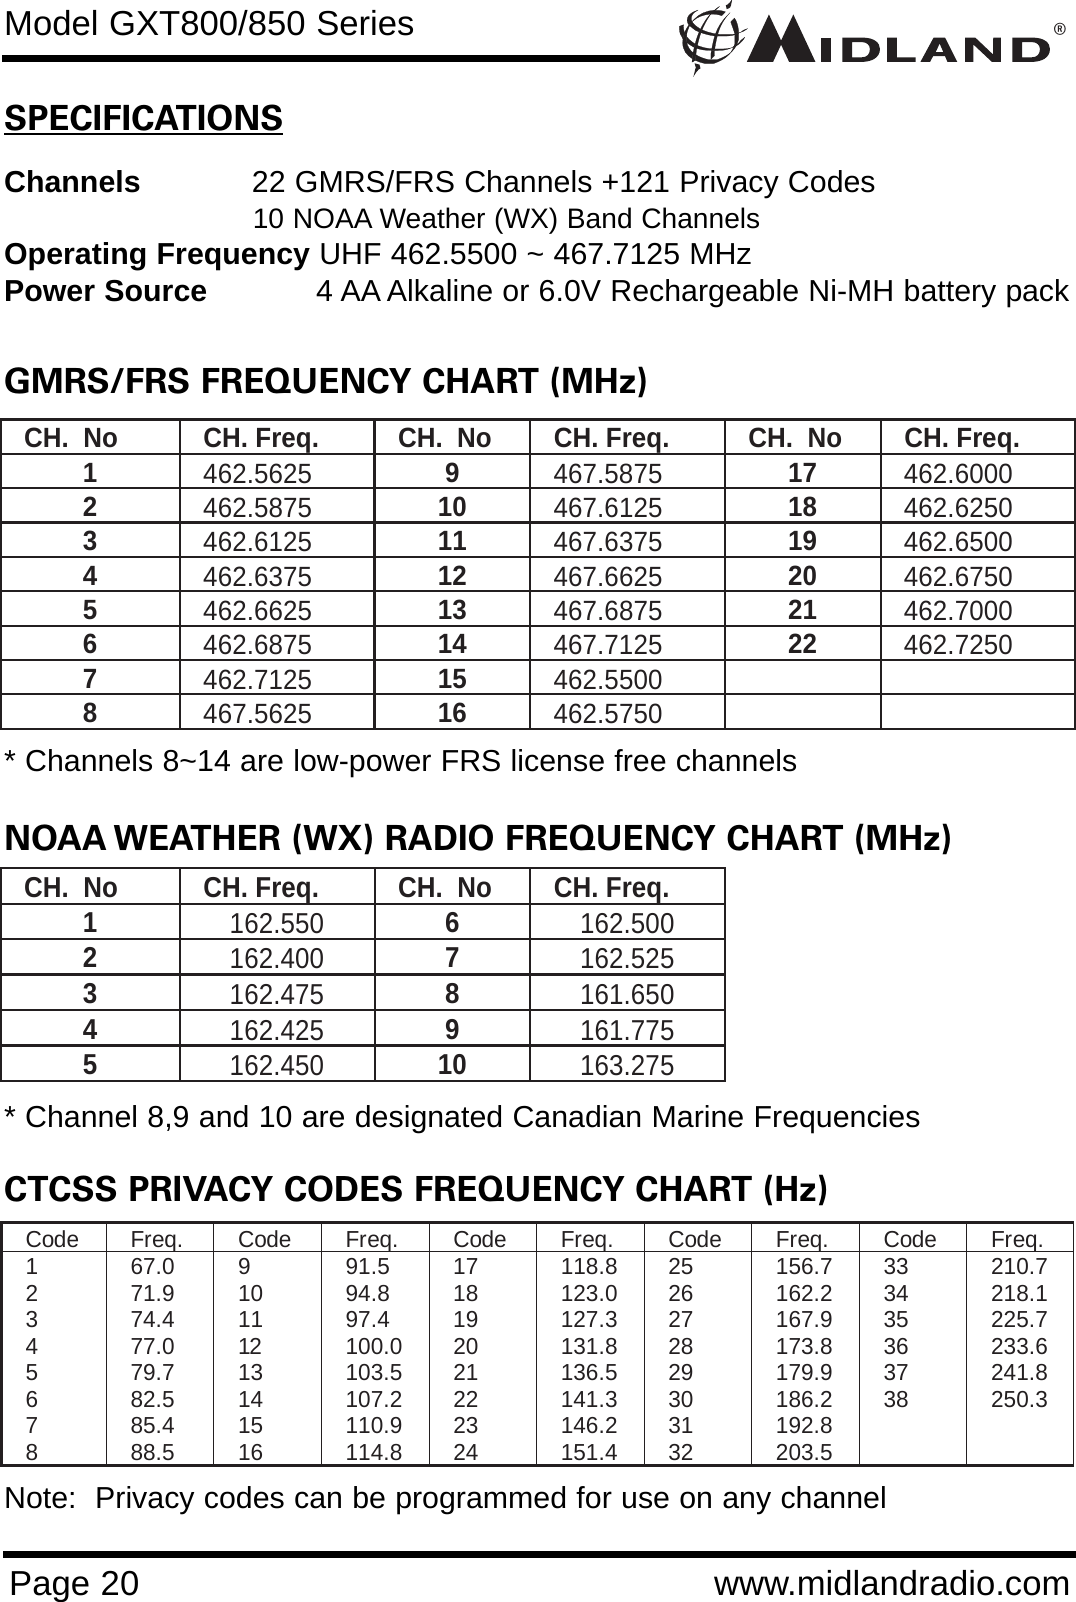 ®Page 20 www.midlandradio.comSPECIFICATIONSChannels 22 GMRS/FRS Channels +121 Privacy Codes10 NOAA Weather (WX) Band Channels Operating Frequency UHF 462.5500 ~ 467.7125 MHzPower Source 4 AA Alkaline or 6.0V Rechargeable Ni-MH battery packGMRS/FRS FREQUENCY CHART (MHz)CH.  No  CH. Freq.  CH.  No  CH. Freq.  CH.  No  CH. Freq. 1  462.5625 9  467.5875 17  462.6000 2  462.5875 10  467.6125 18  462.6250 3  462.6125 11  467.6375 19  462.6500 4  462.6375 12  467.6625 20  462.6750 5  462.6625 13  467.6875 21  462.7000 6  462.6875 14  467.7125 22  462.7250 7  462.7125 15  462.5500   8  467.5625 16  462.5750   NOAA WEATHER (WX) RADIO FREQUENCY CHART (MHz)CH.  No  CH. Freq.  CH.  No  CH. Freq. 1  162.550 6  162.500 2  162.400 7  162.525 3  162.475 8  161.650 4  162.425 9  161.775 5  162.450 10  163.275 CTCSS PRIVACY CODES FREQUENCY CHART (Hz)Code Freq.  Code Freq.  Code Freq.  Code Freq.  Code Freq.  1  67.0 9  91.5 17  118.8 25  156.7 33  210.7 2  71.9 10  94.8 18  123.0 26  162.2 34  218.1 3  74.4 11  97.4 19  127.3 27  167.9 35  225.7 4 77.0 12 100.0 20  131.8 28  173.8 36  233.6 5 79.7 13 103.5 21  136.5 29  179.9 37  241.8 6 82.5 14 107.2 22  141.3 30  186.2 38  250.3 7 85.4 15 110.9 23  146.2 31  192.8    8 88.5 16 114.8 24  151.4 32  203.5    * Channel 8,9 and 10 are designated Canadian Marine Frequencies* Channels 8~14 are low-power FRS license free channelsNote:  Privacy codes can be programmed for use on any channelModel GXT800/850 Series